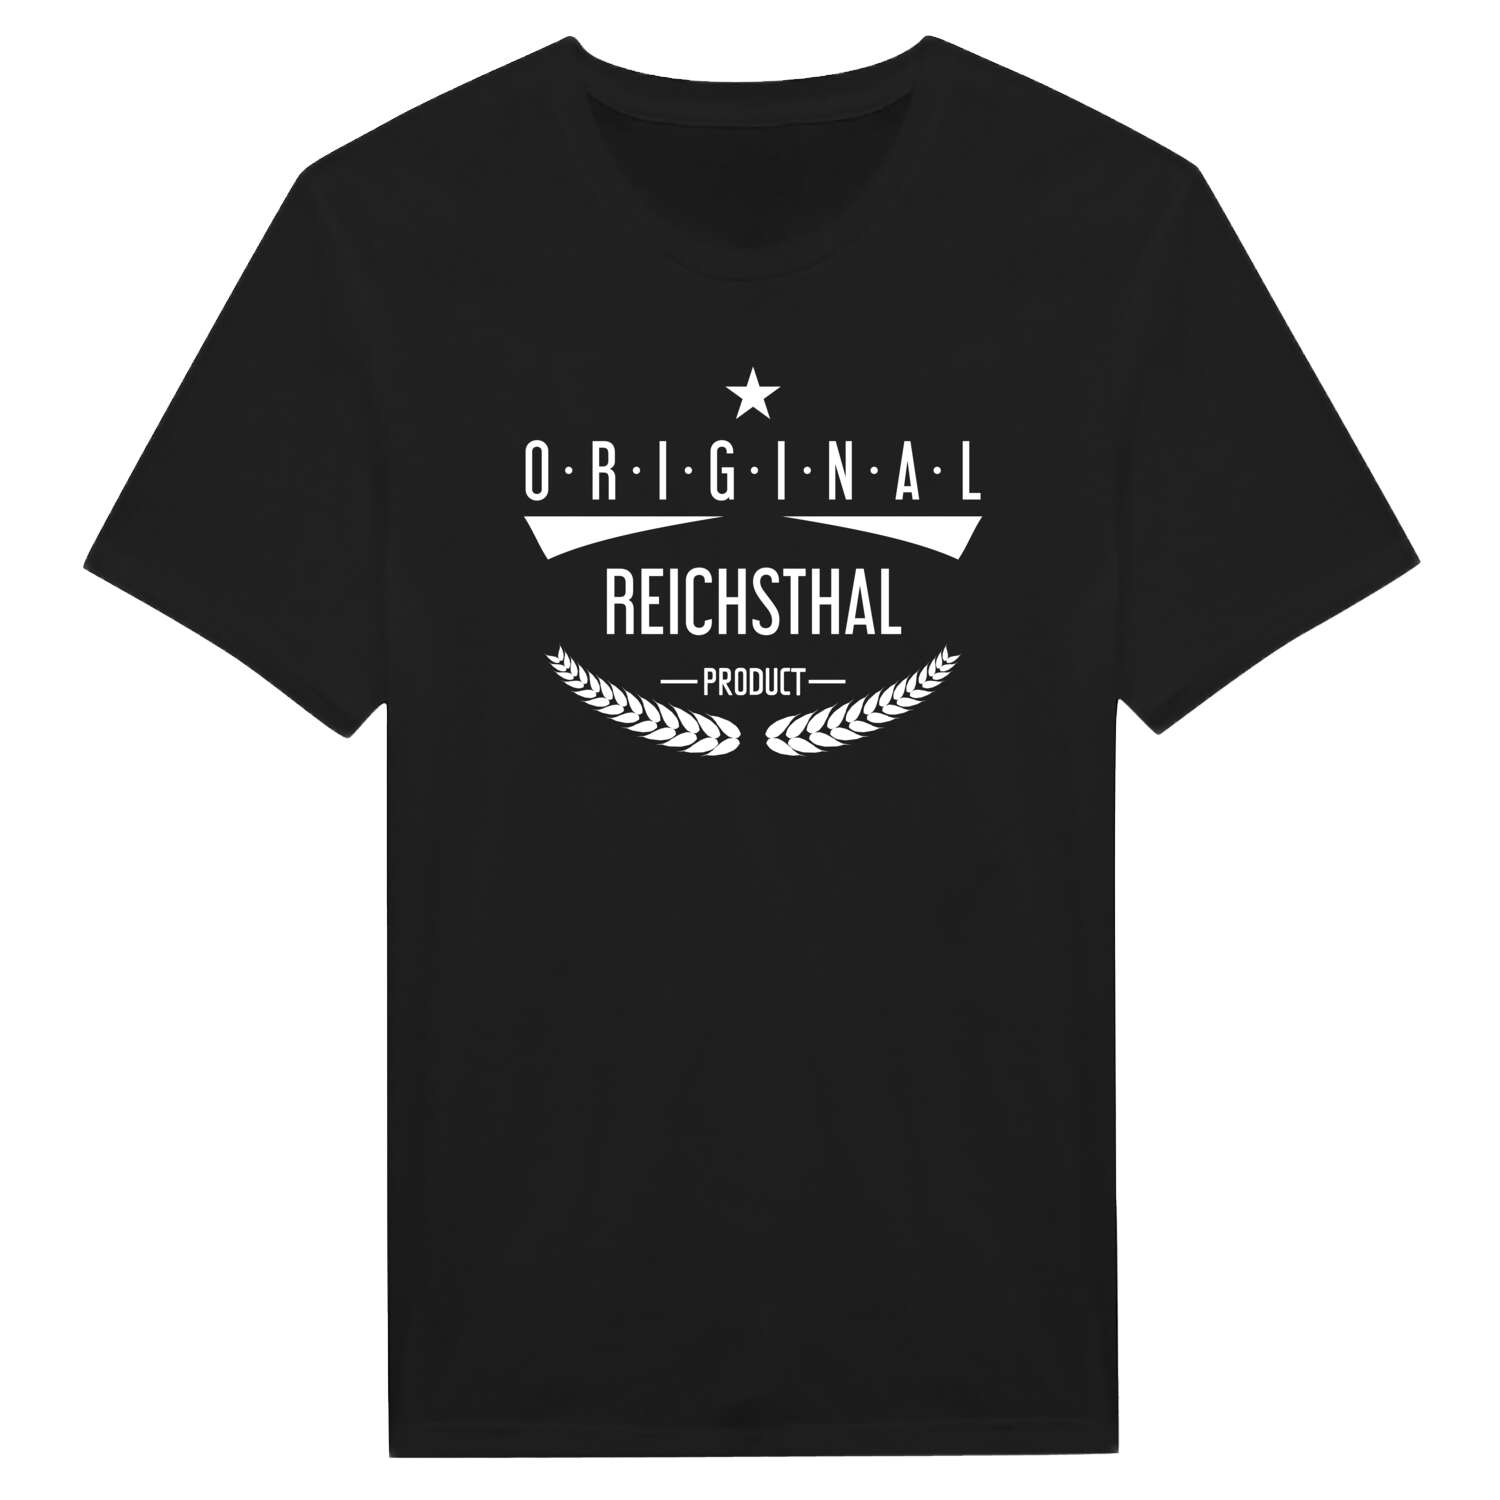 Reichsthal T-Shirt »Original Product«